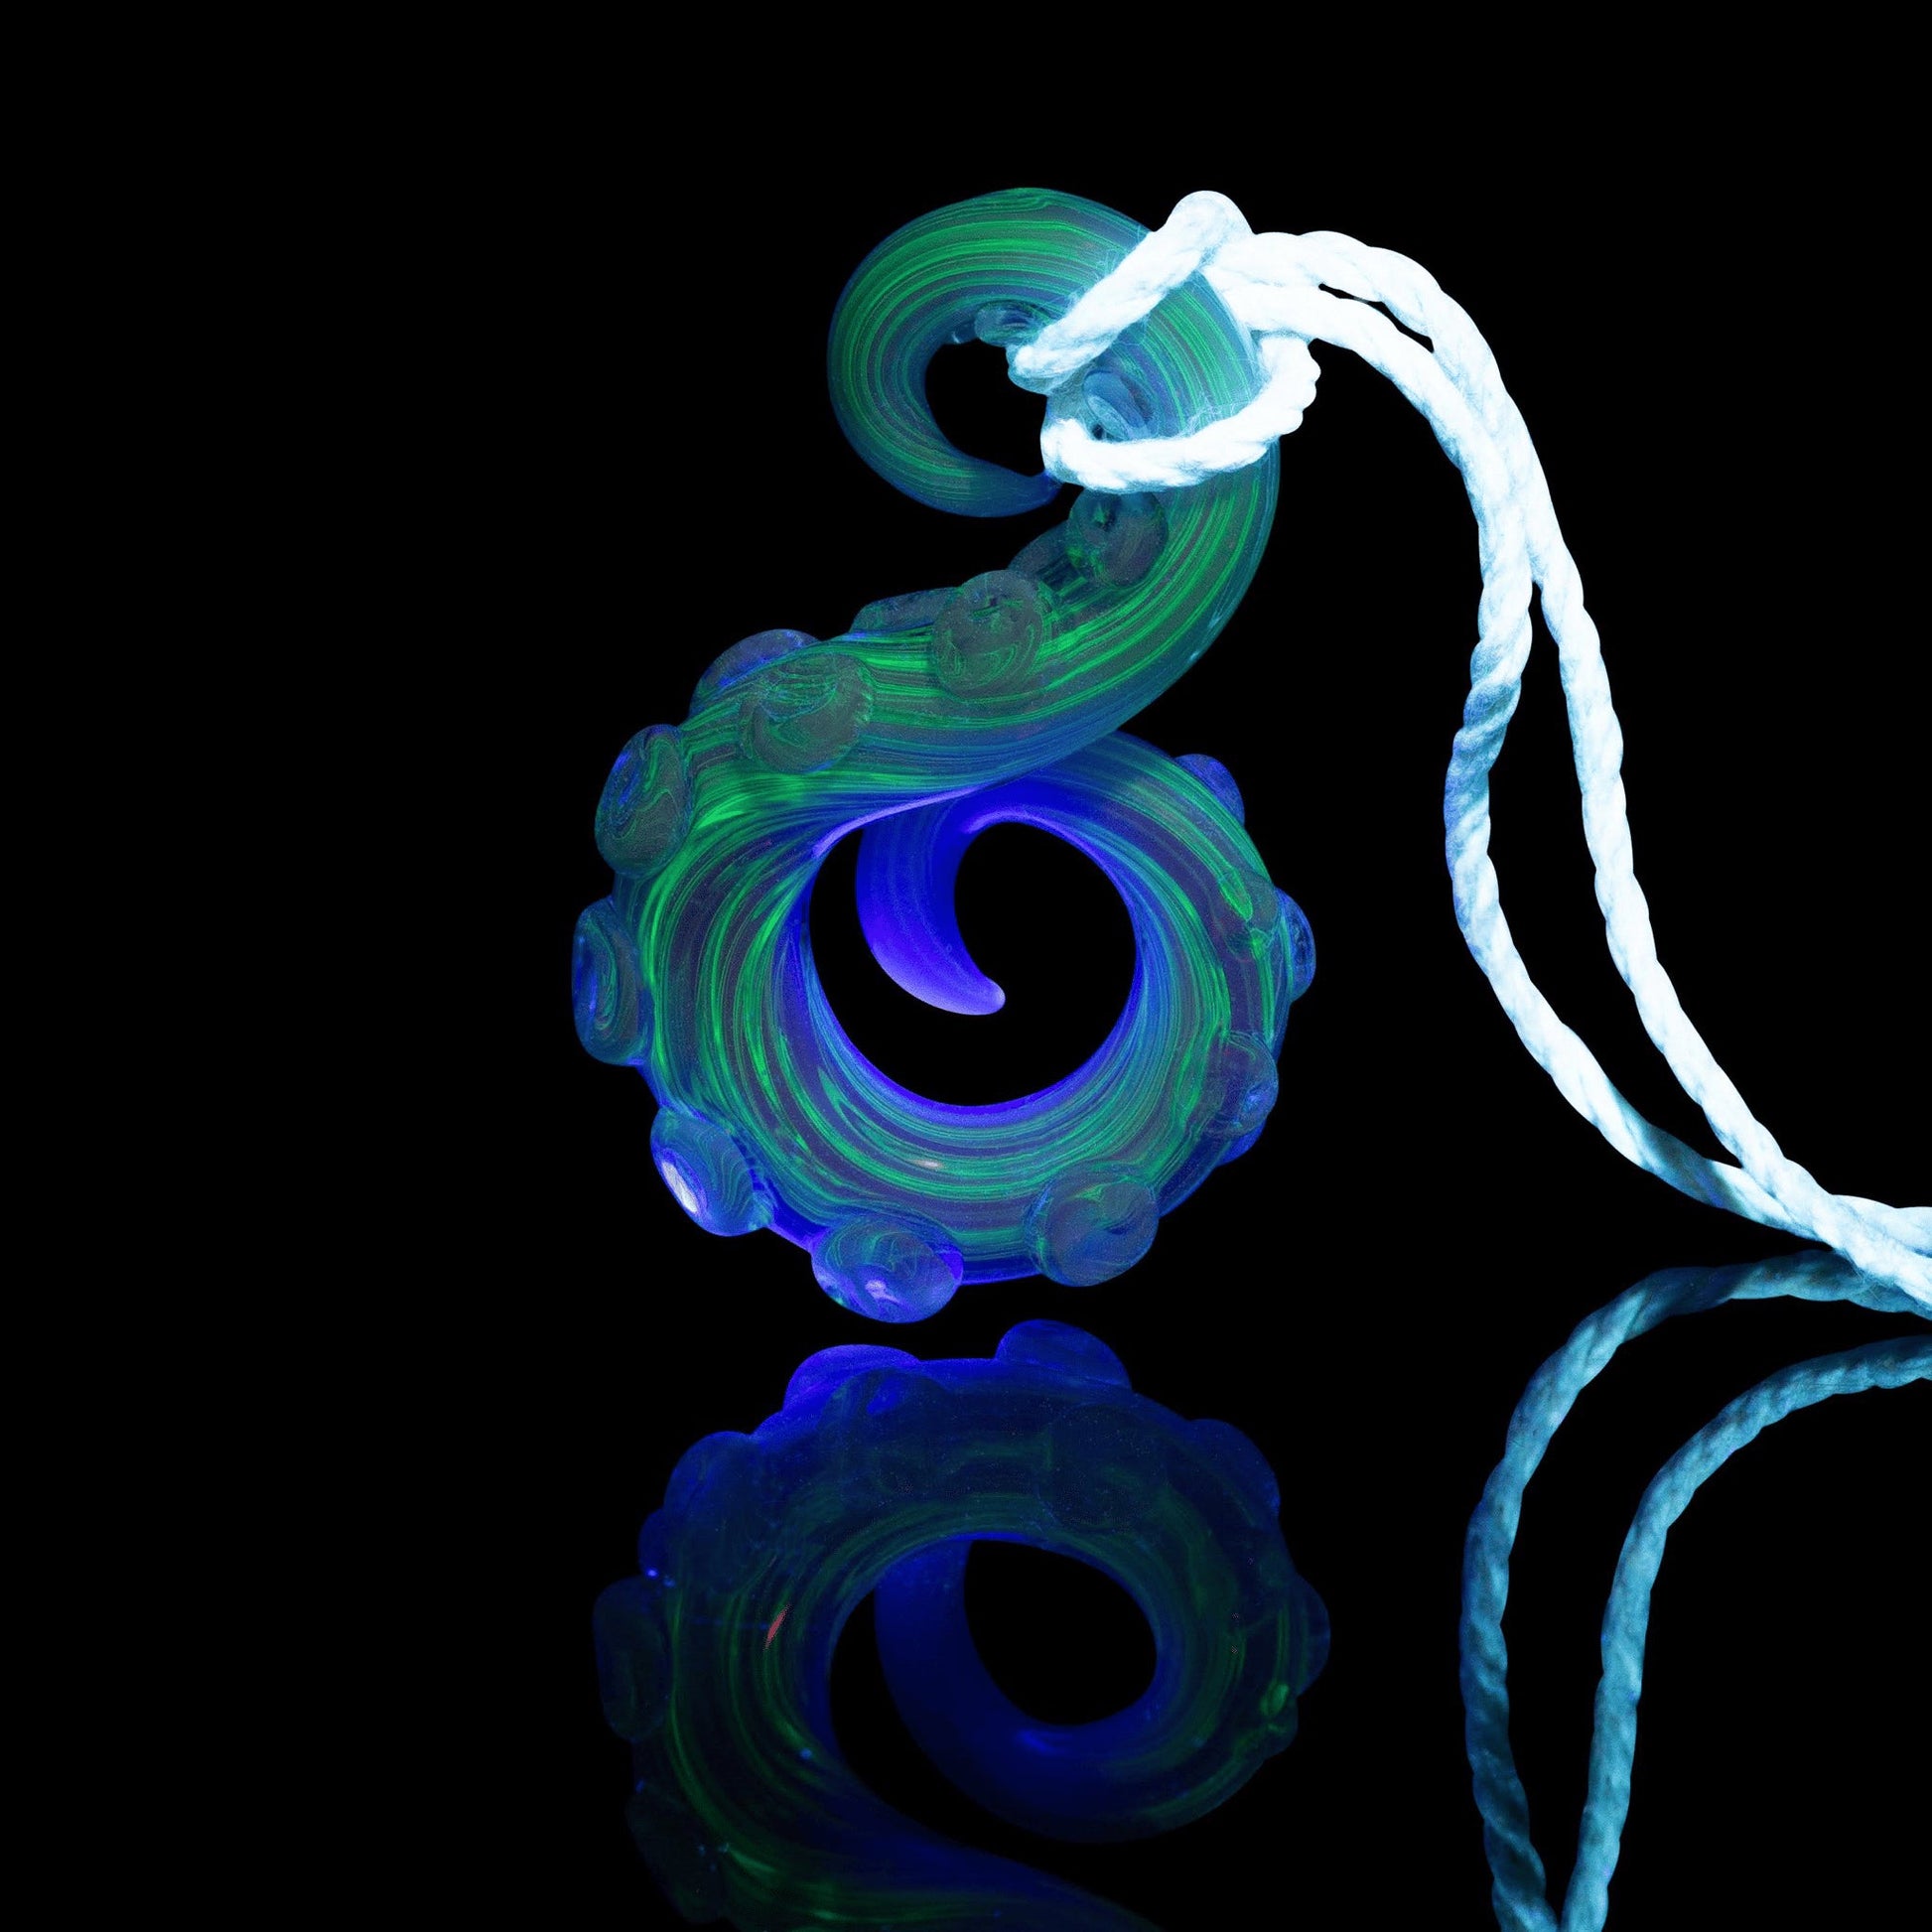 innovative glass pendant - Collab Tentacle Pendant by Wicked x Scomo Moanet (Scribble Season 2022)